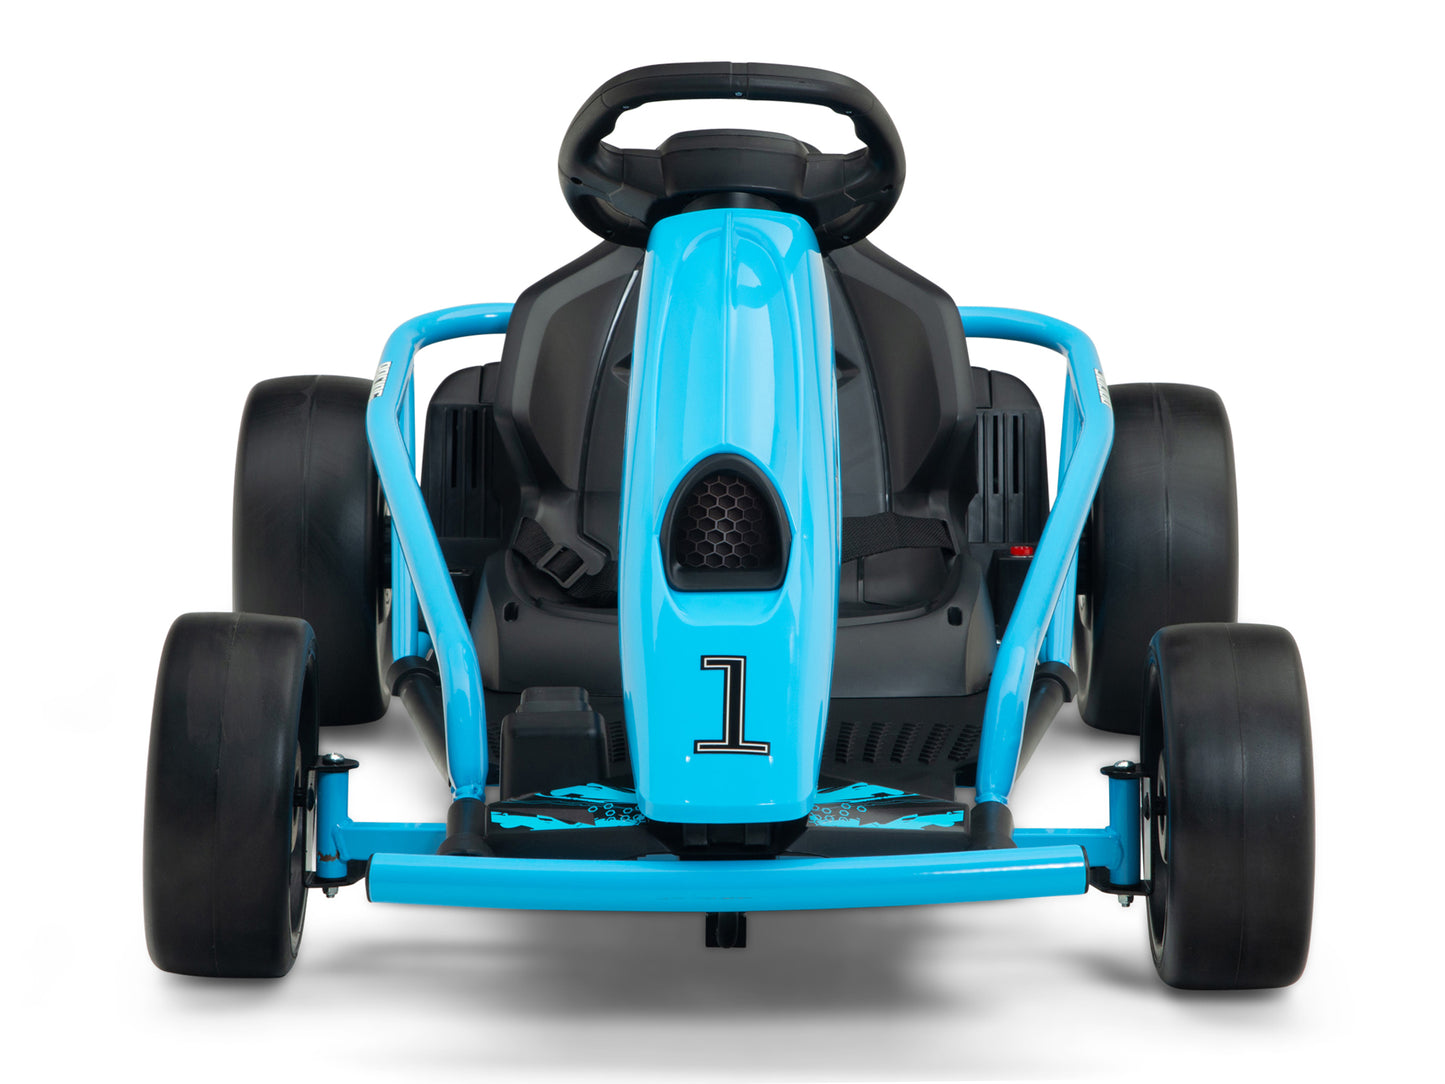 F1 Style Ultimate Power 24V Drift Ride On Go Kart  Car Tots Remote Control  Ride On Cars, Trucks, SUVs and jeeps